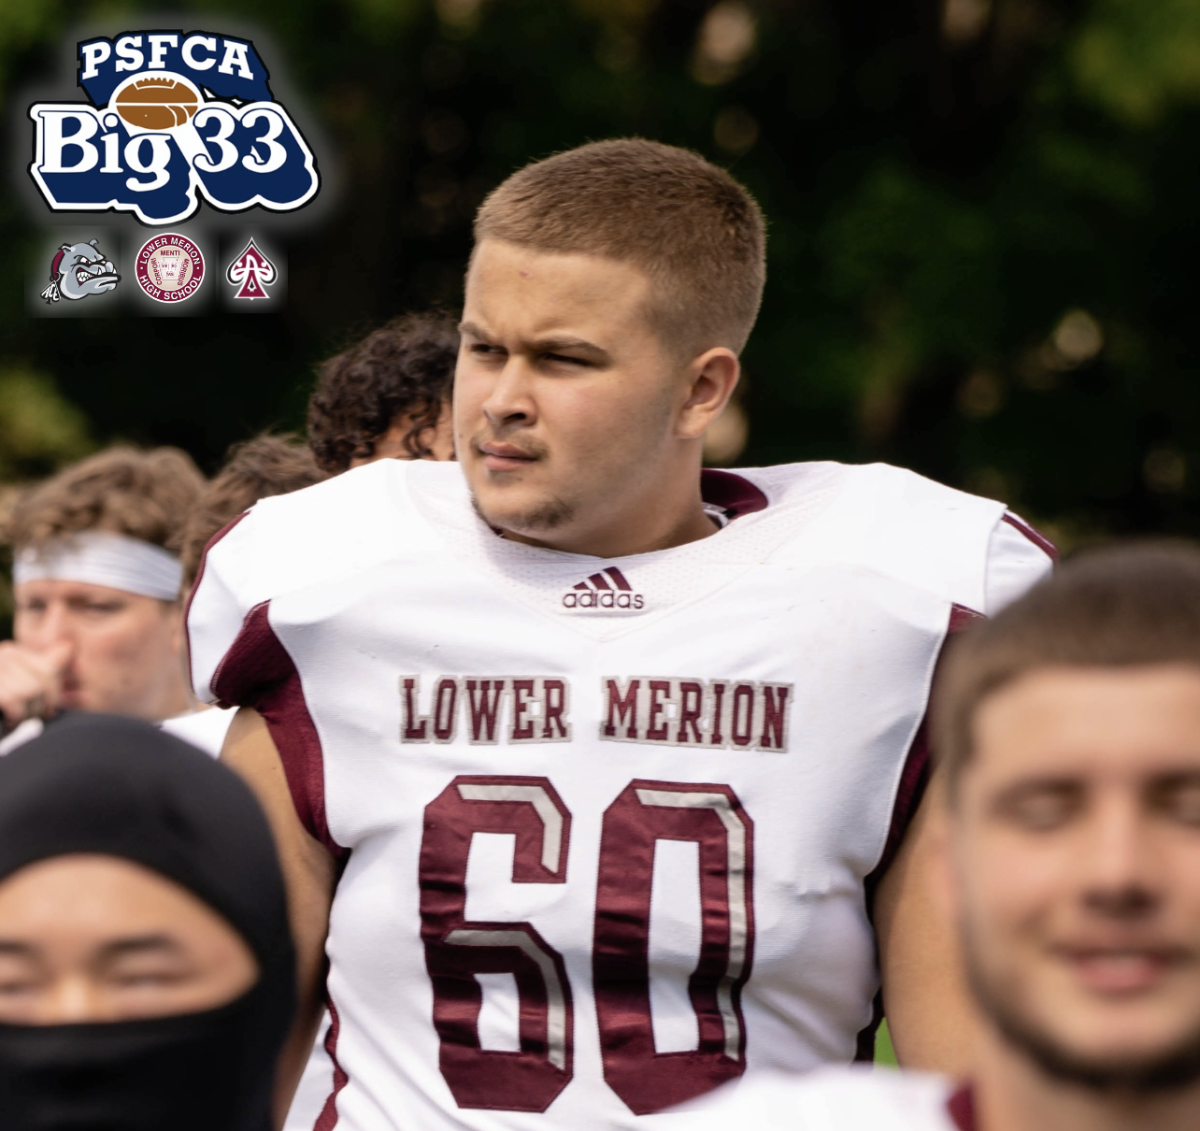 Lower Merion Aces – PA Football News